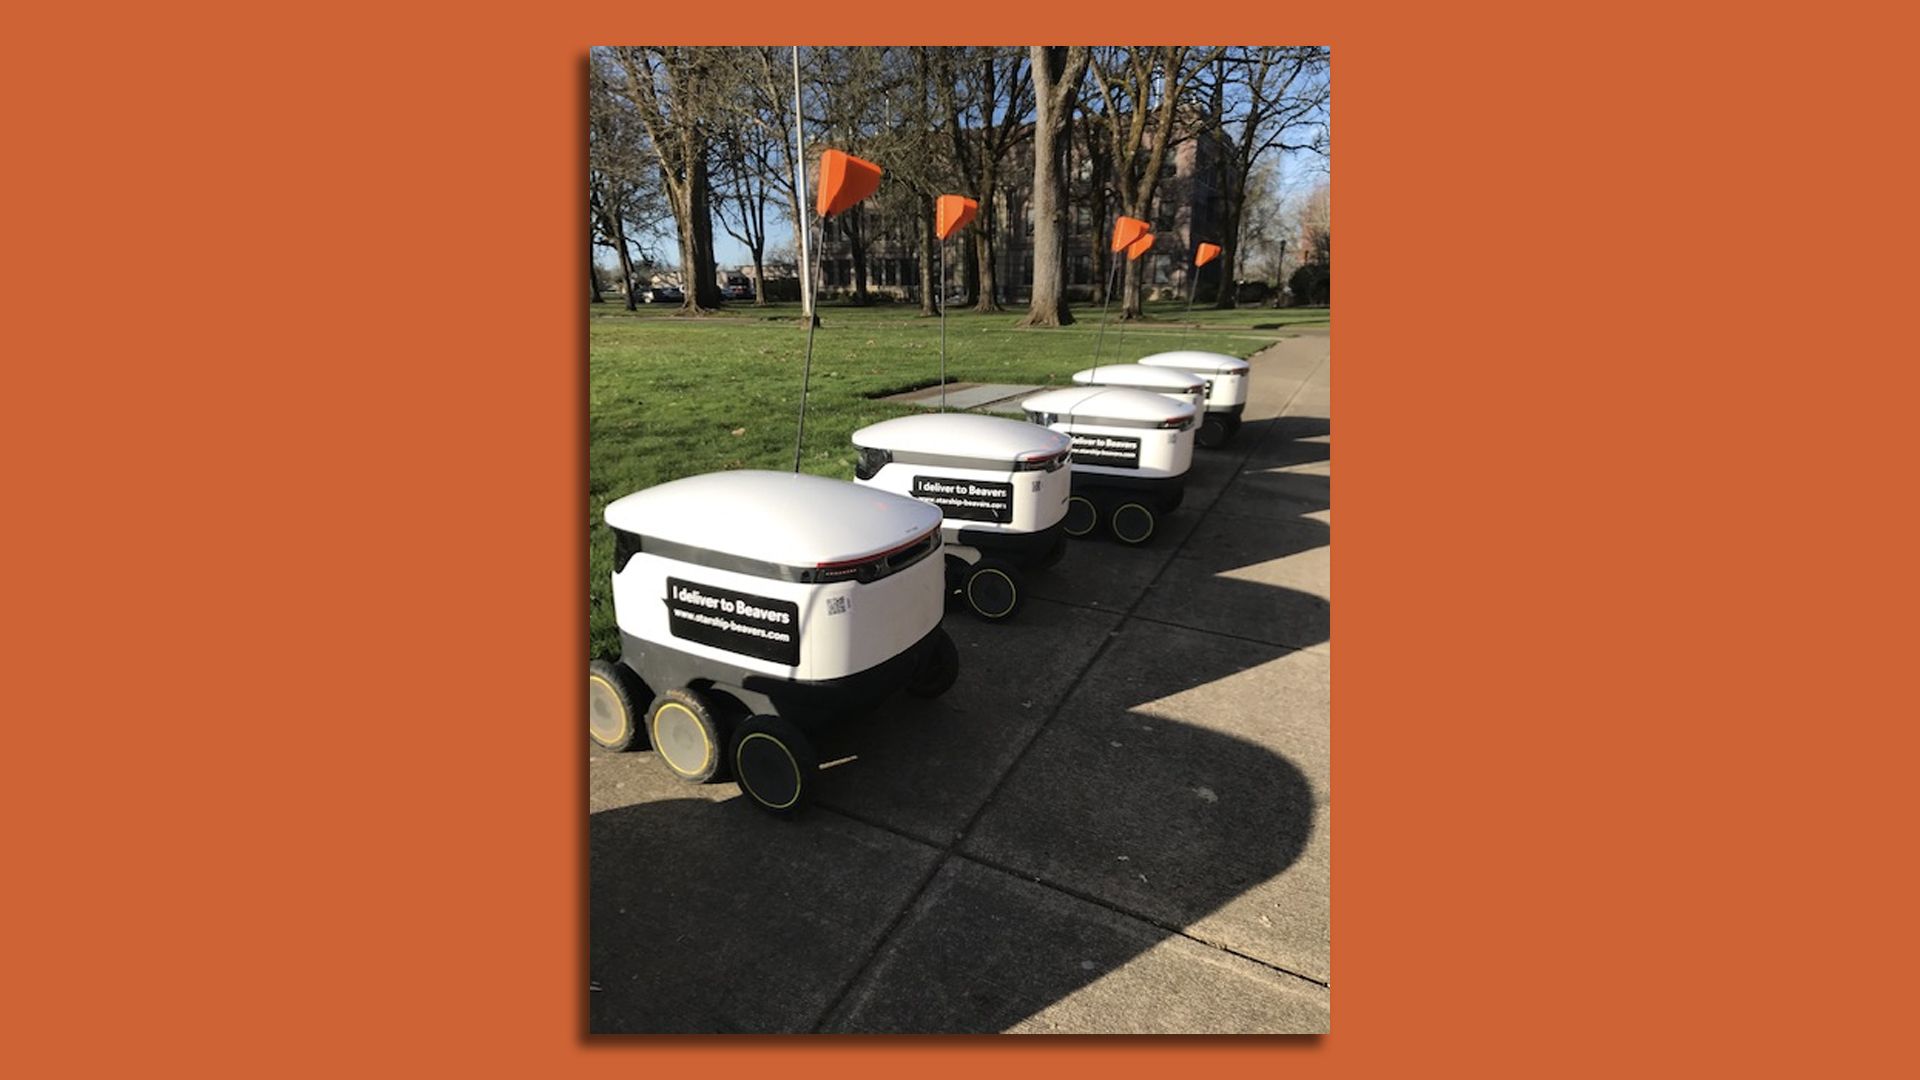 Delivery robots on the campus of the University of Oregon.